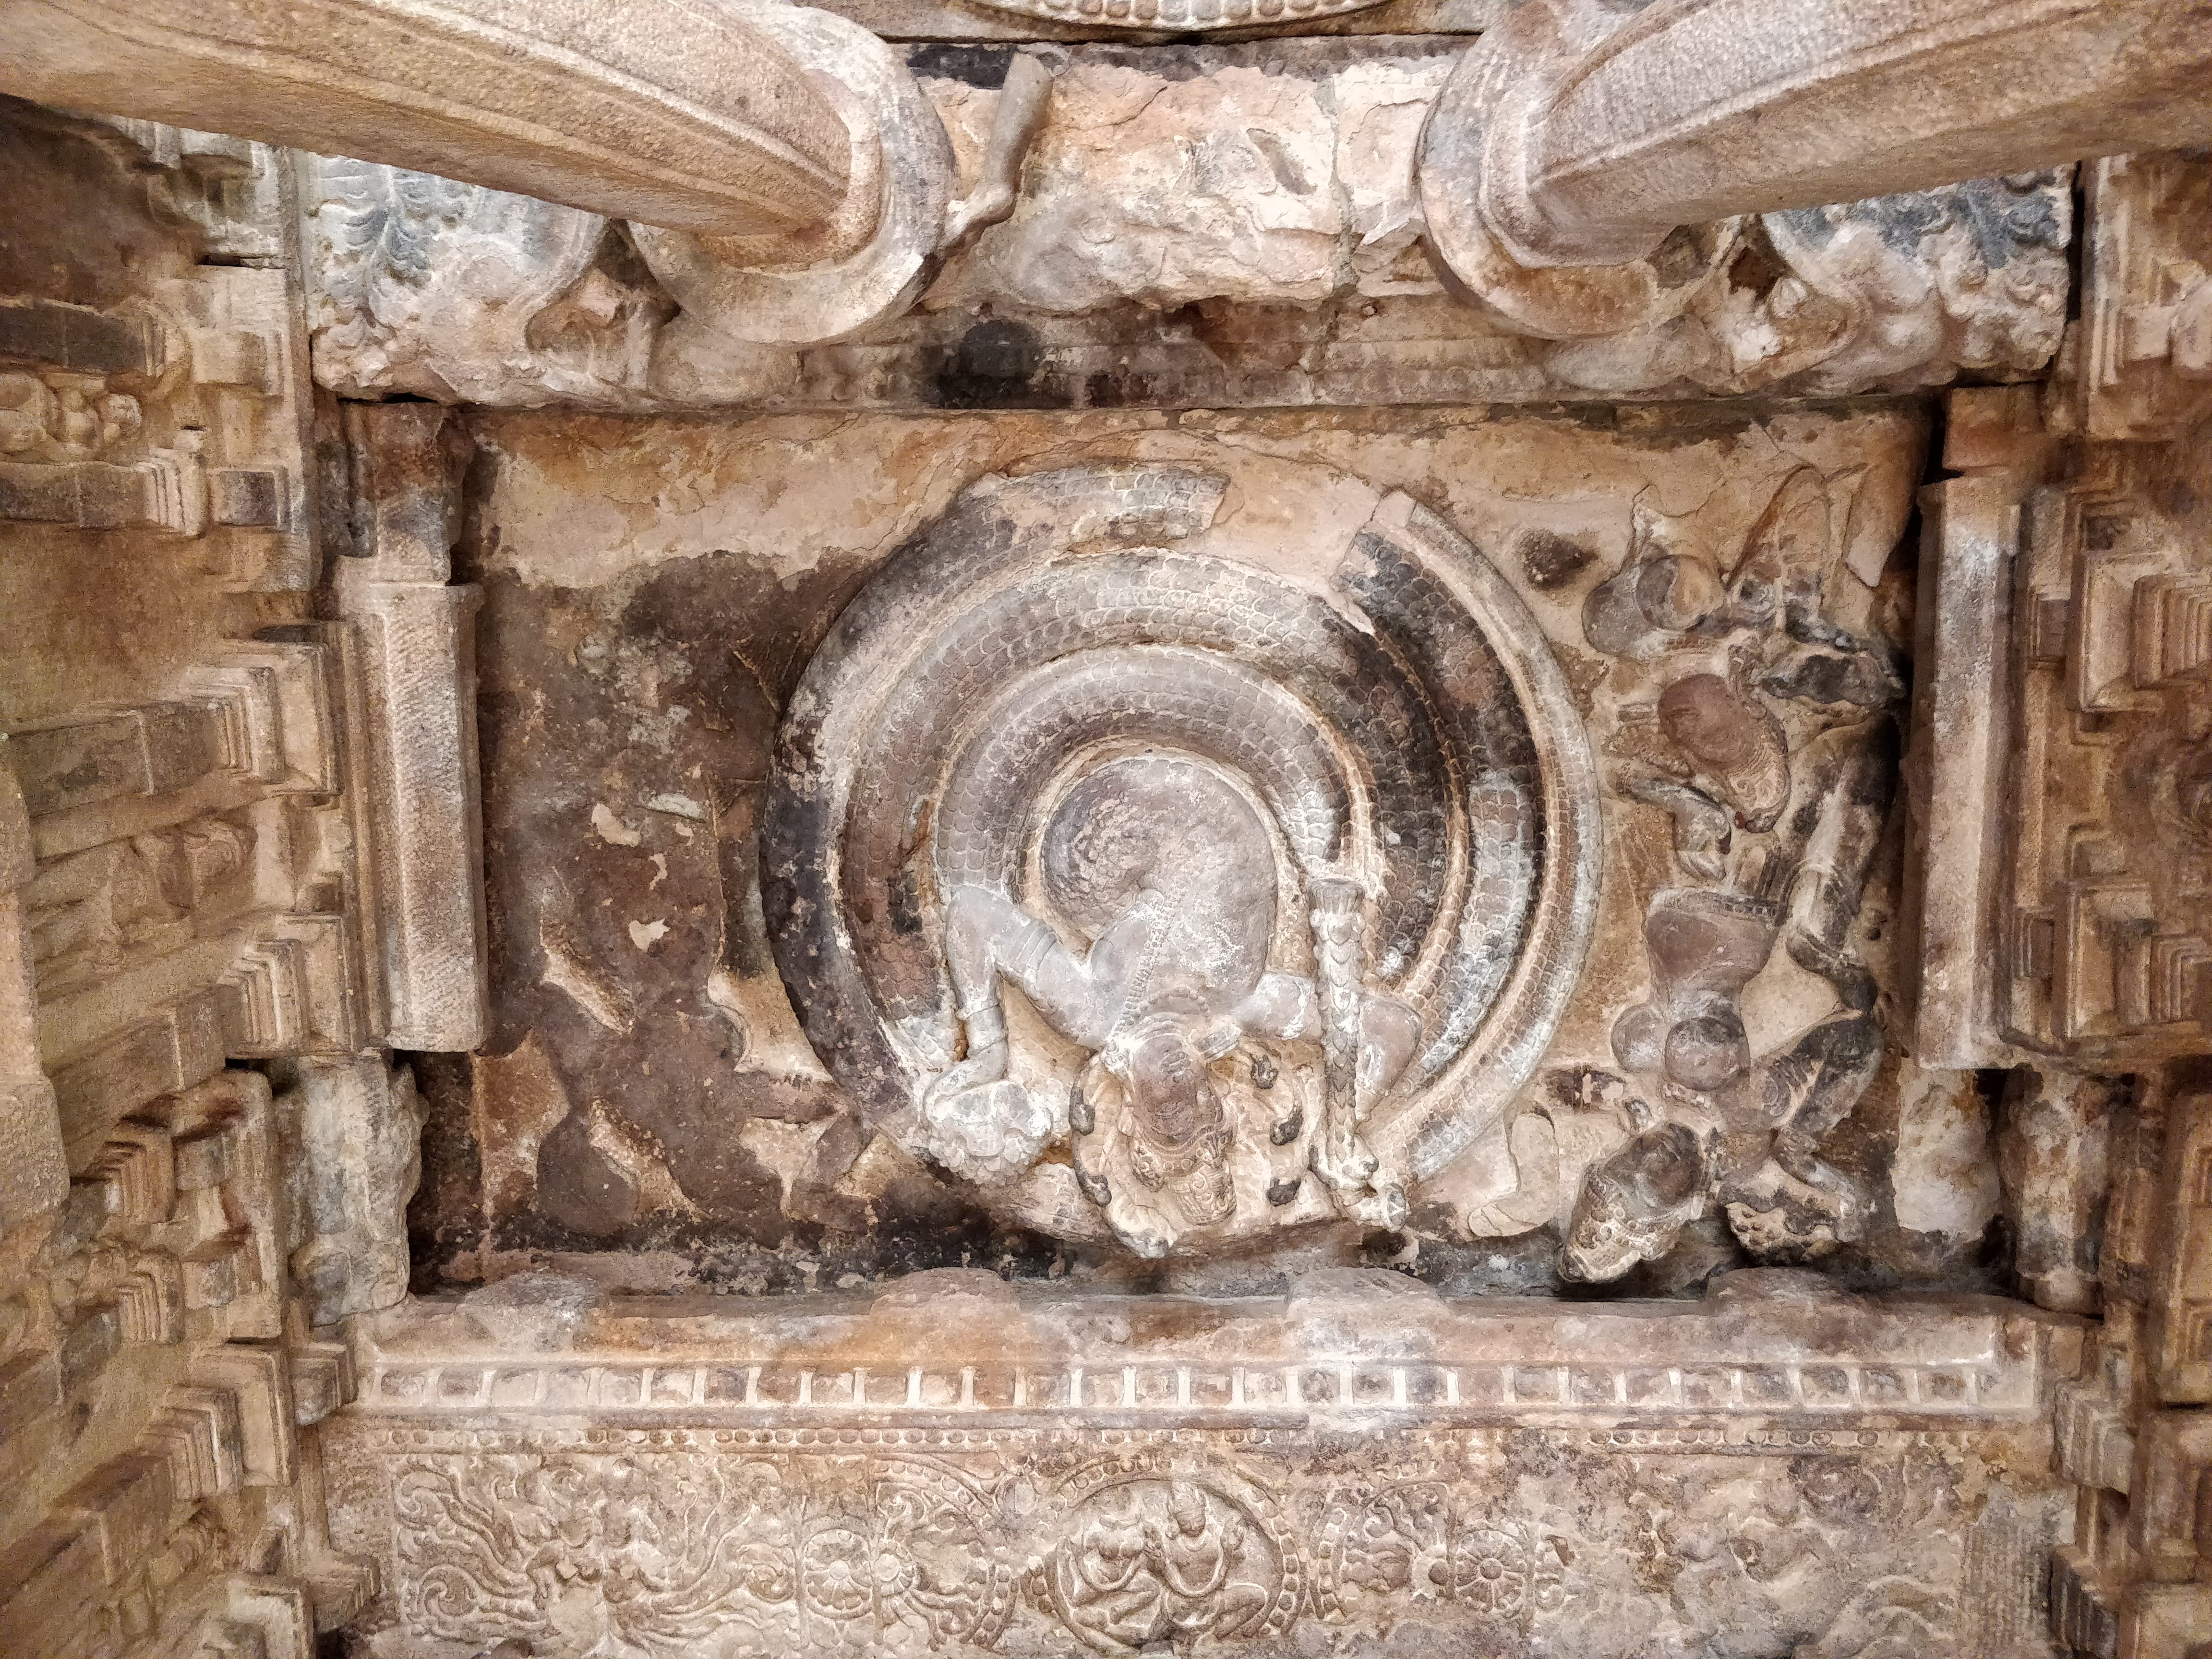 carvings on the roof of Durga temple